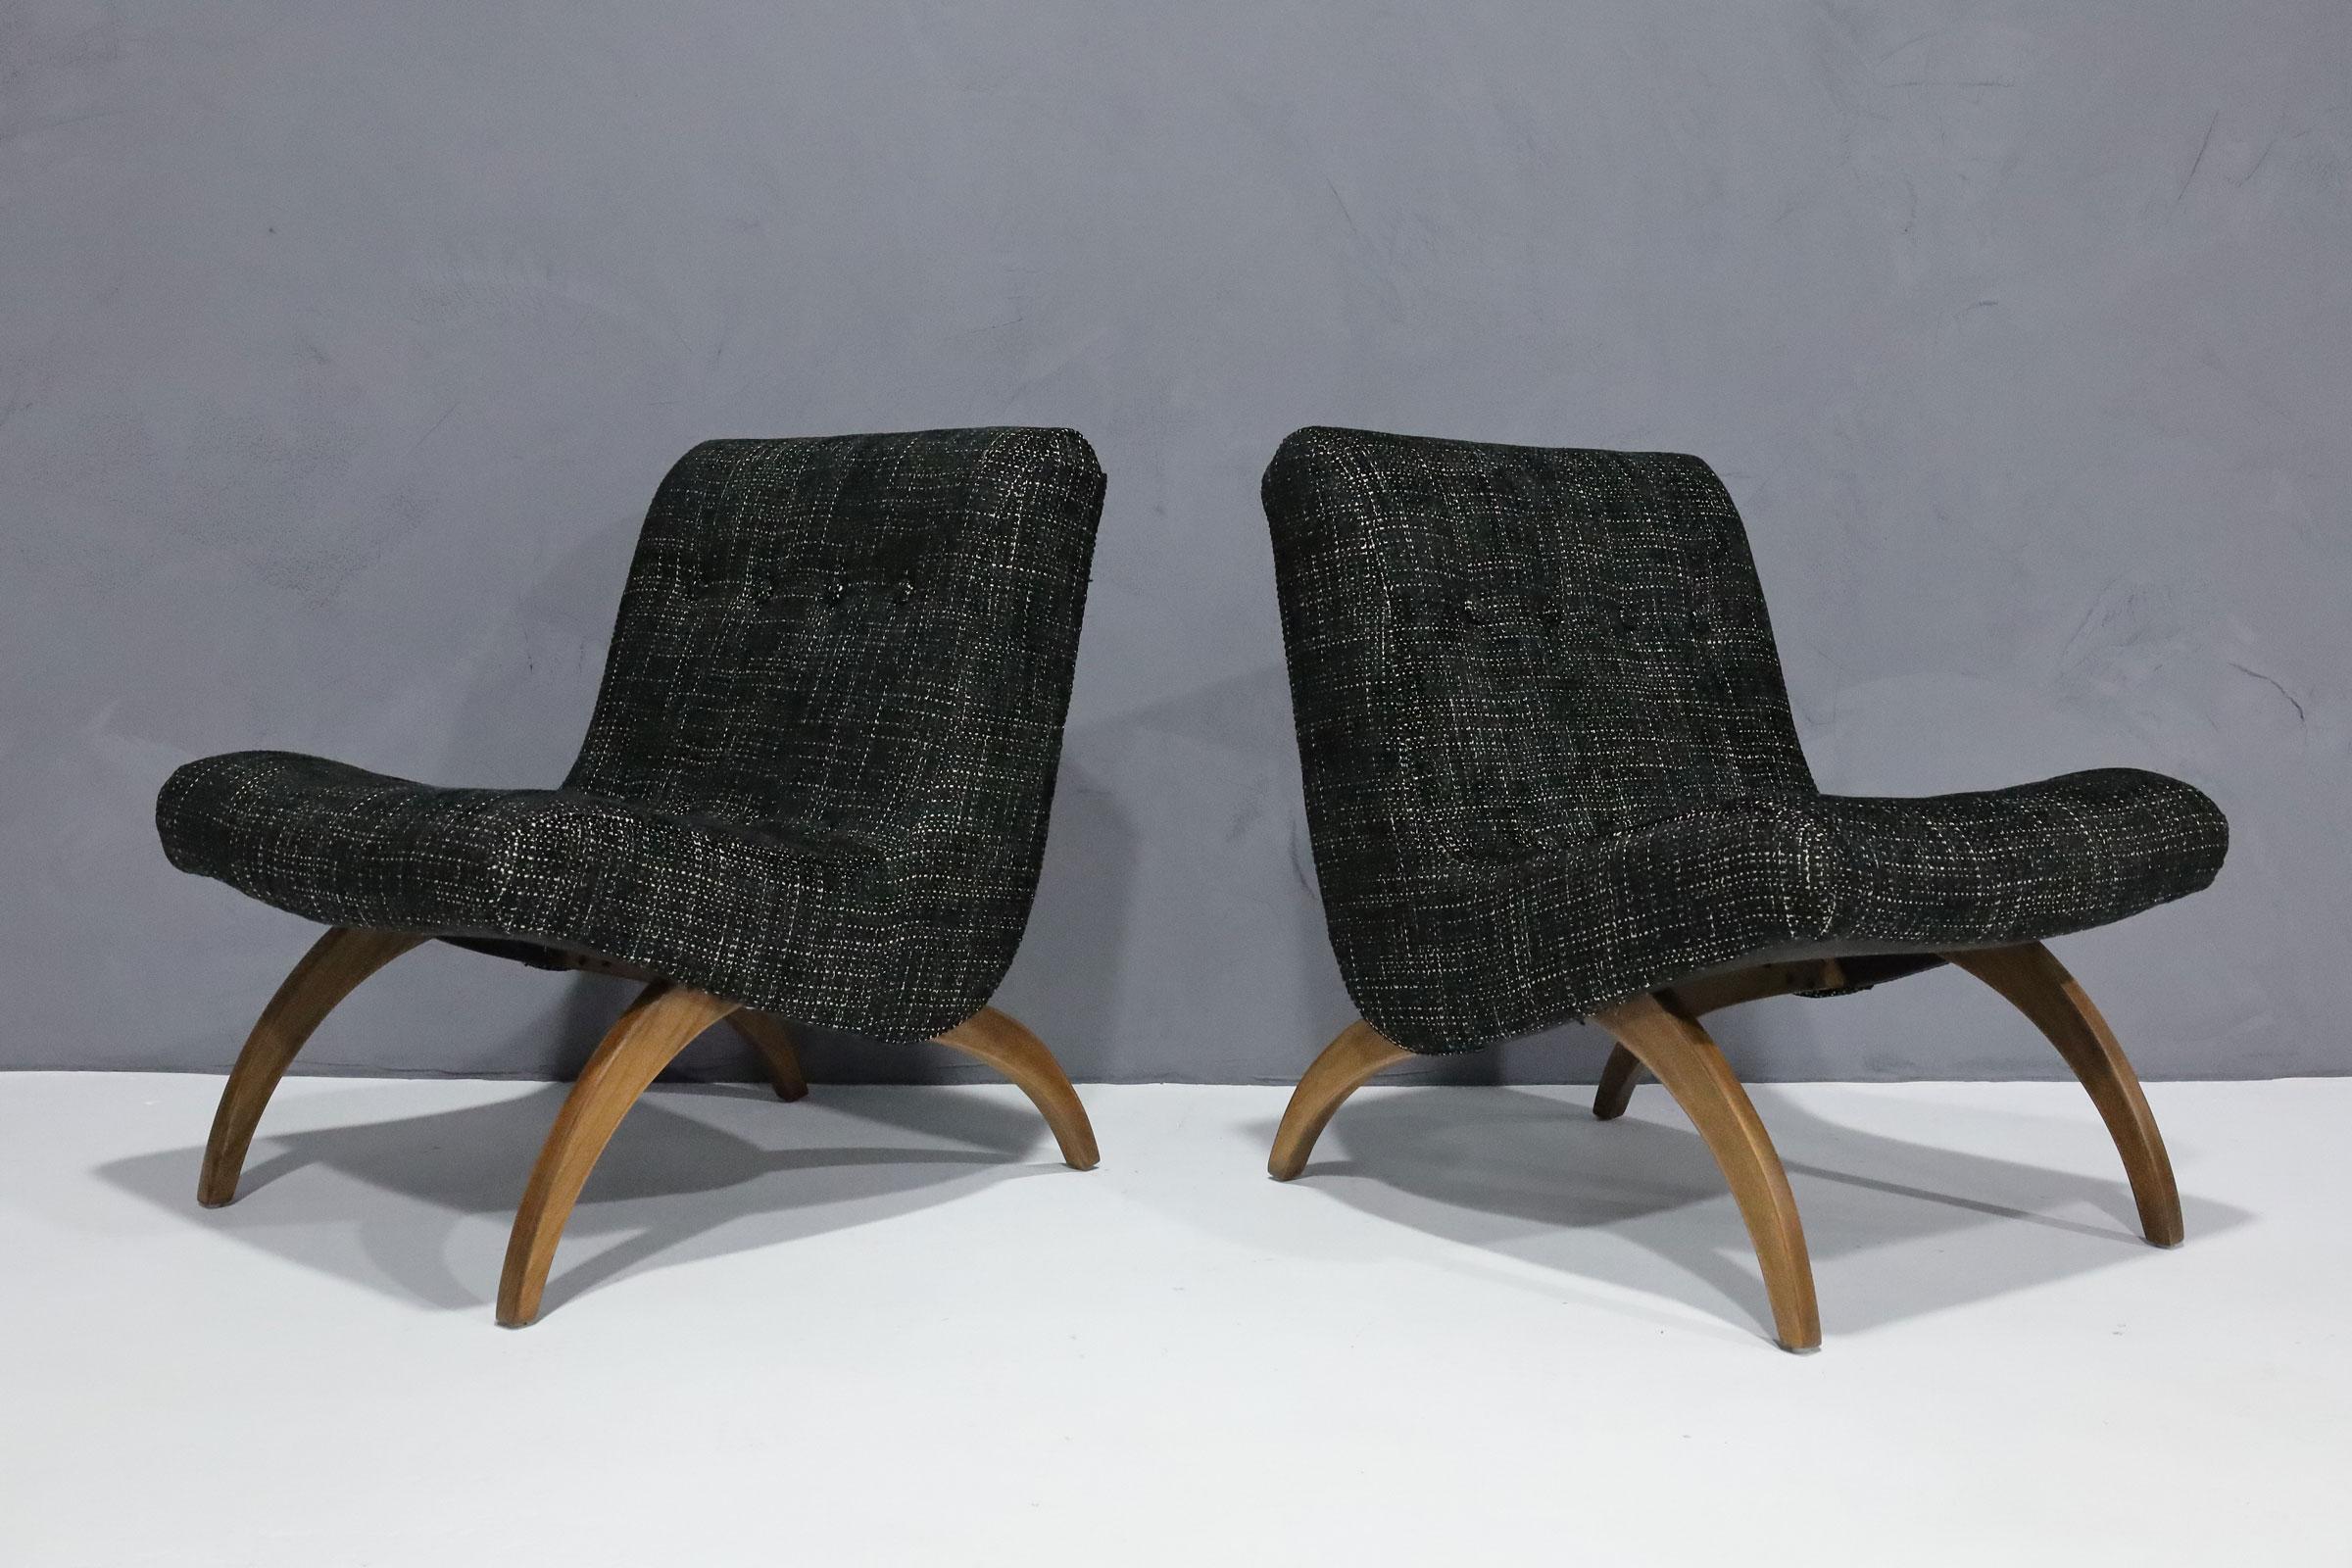 We have reupholstered and refinished these scoop chairs designed by Milo Baughman. Great lines and very comfortable. Chairs are sturdy and look great in a handsome black with cream weave. Stamped April 1958.